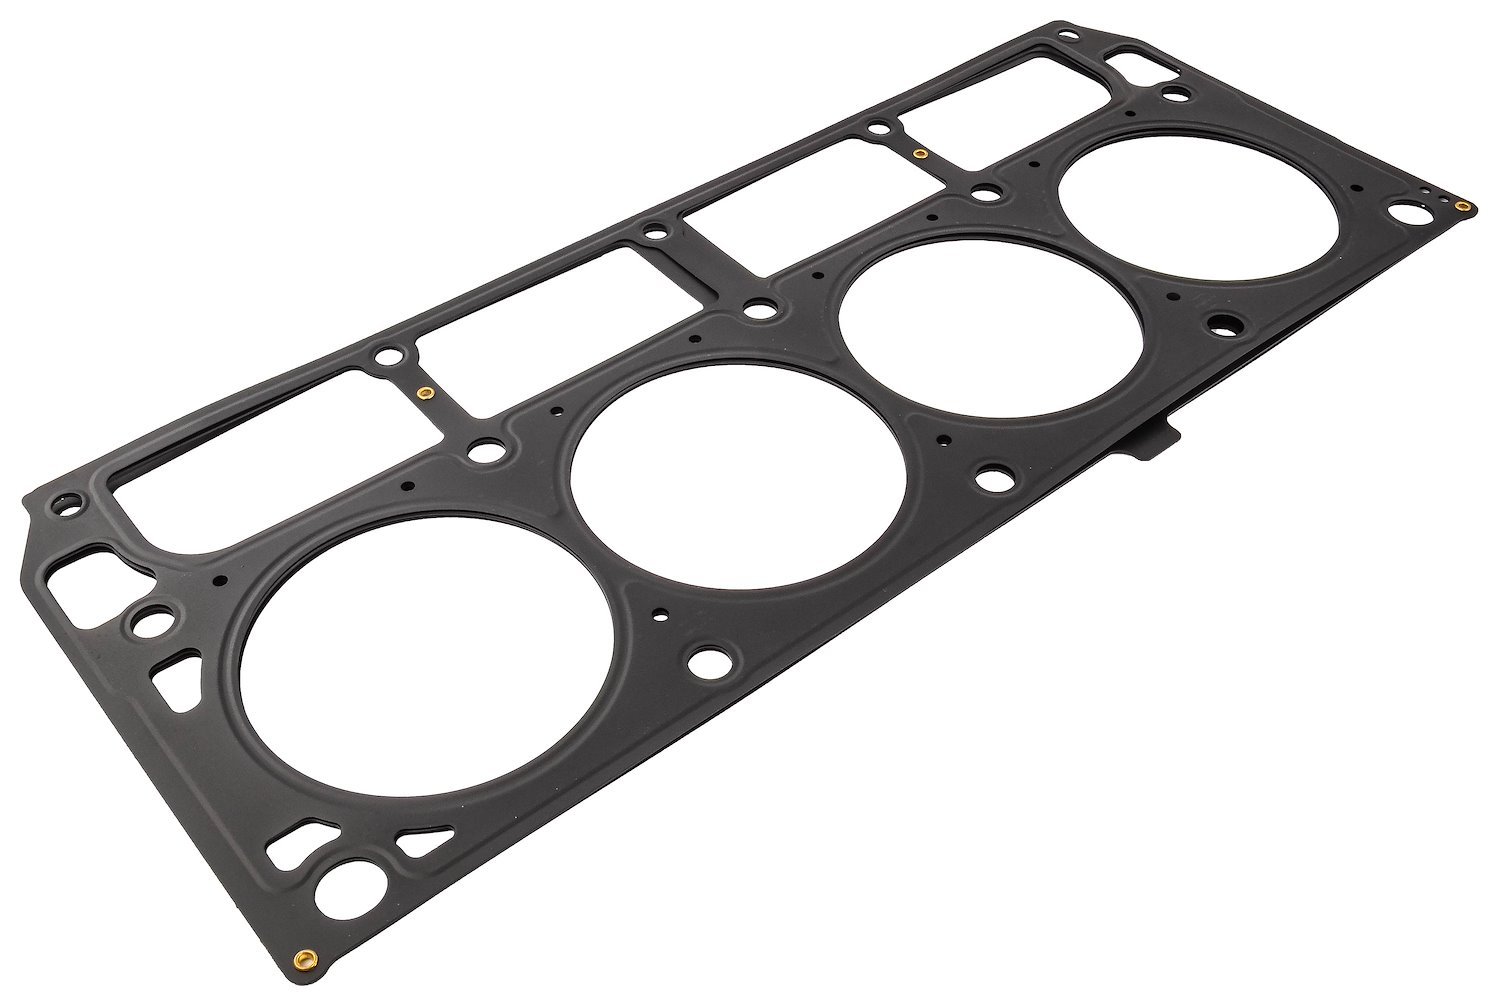 MLS Cylinder Head Gasket for GM LS Engines [Bore: 4.020 in.]